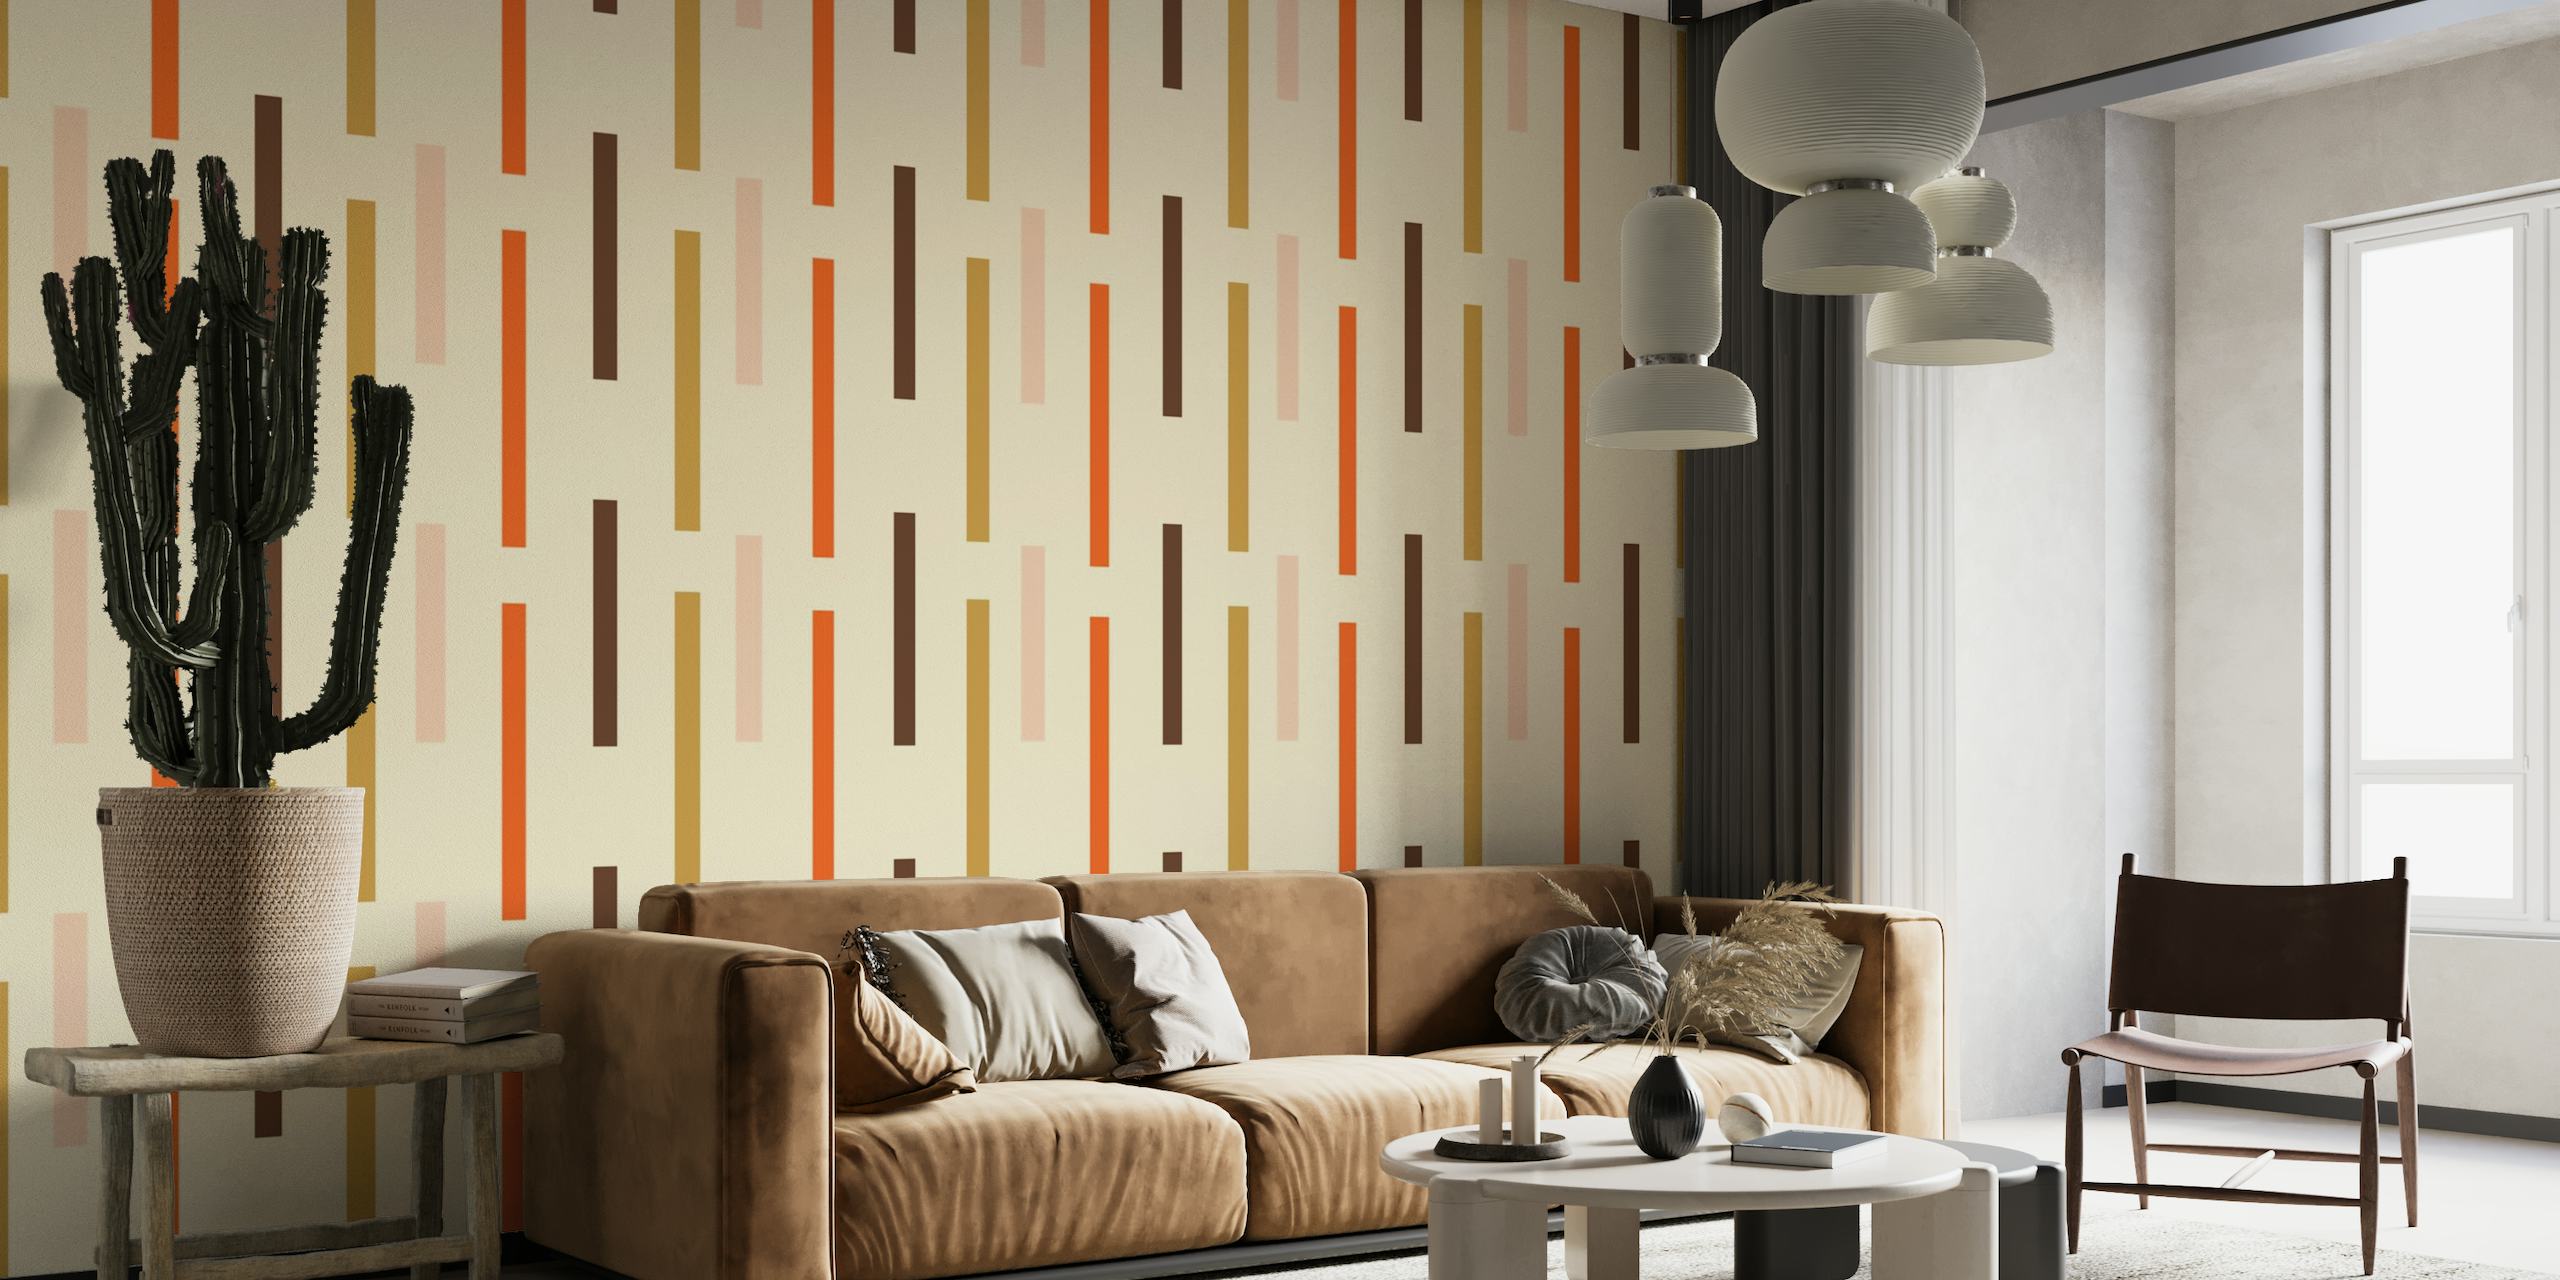 Mindfulness Stripes Beige wall mural featuring vertical stripes in beige, pink, and earth tones